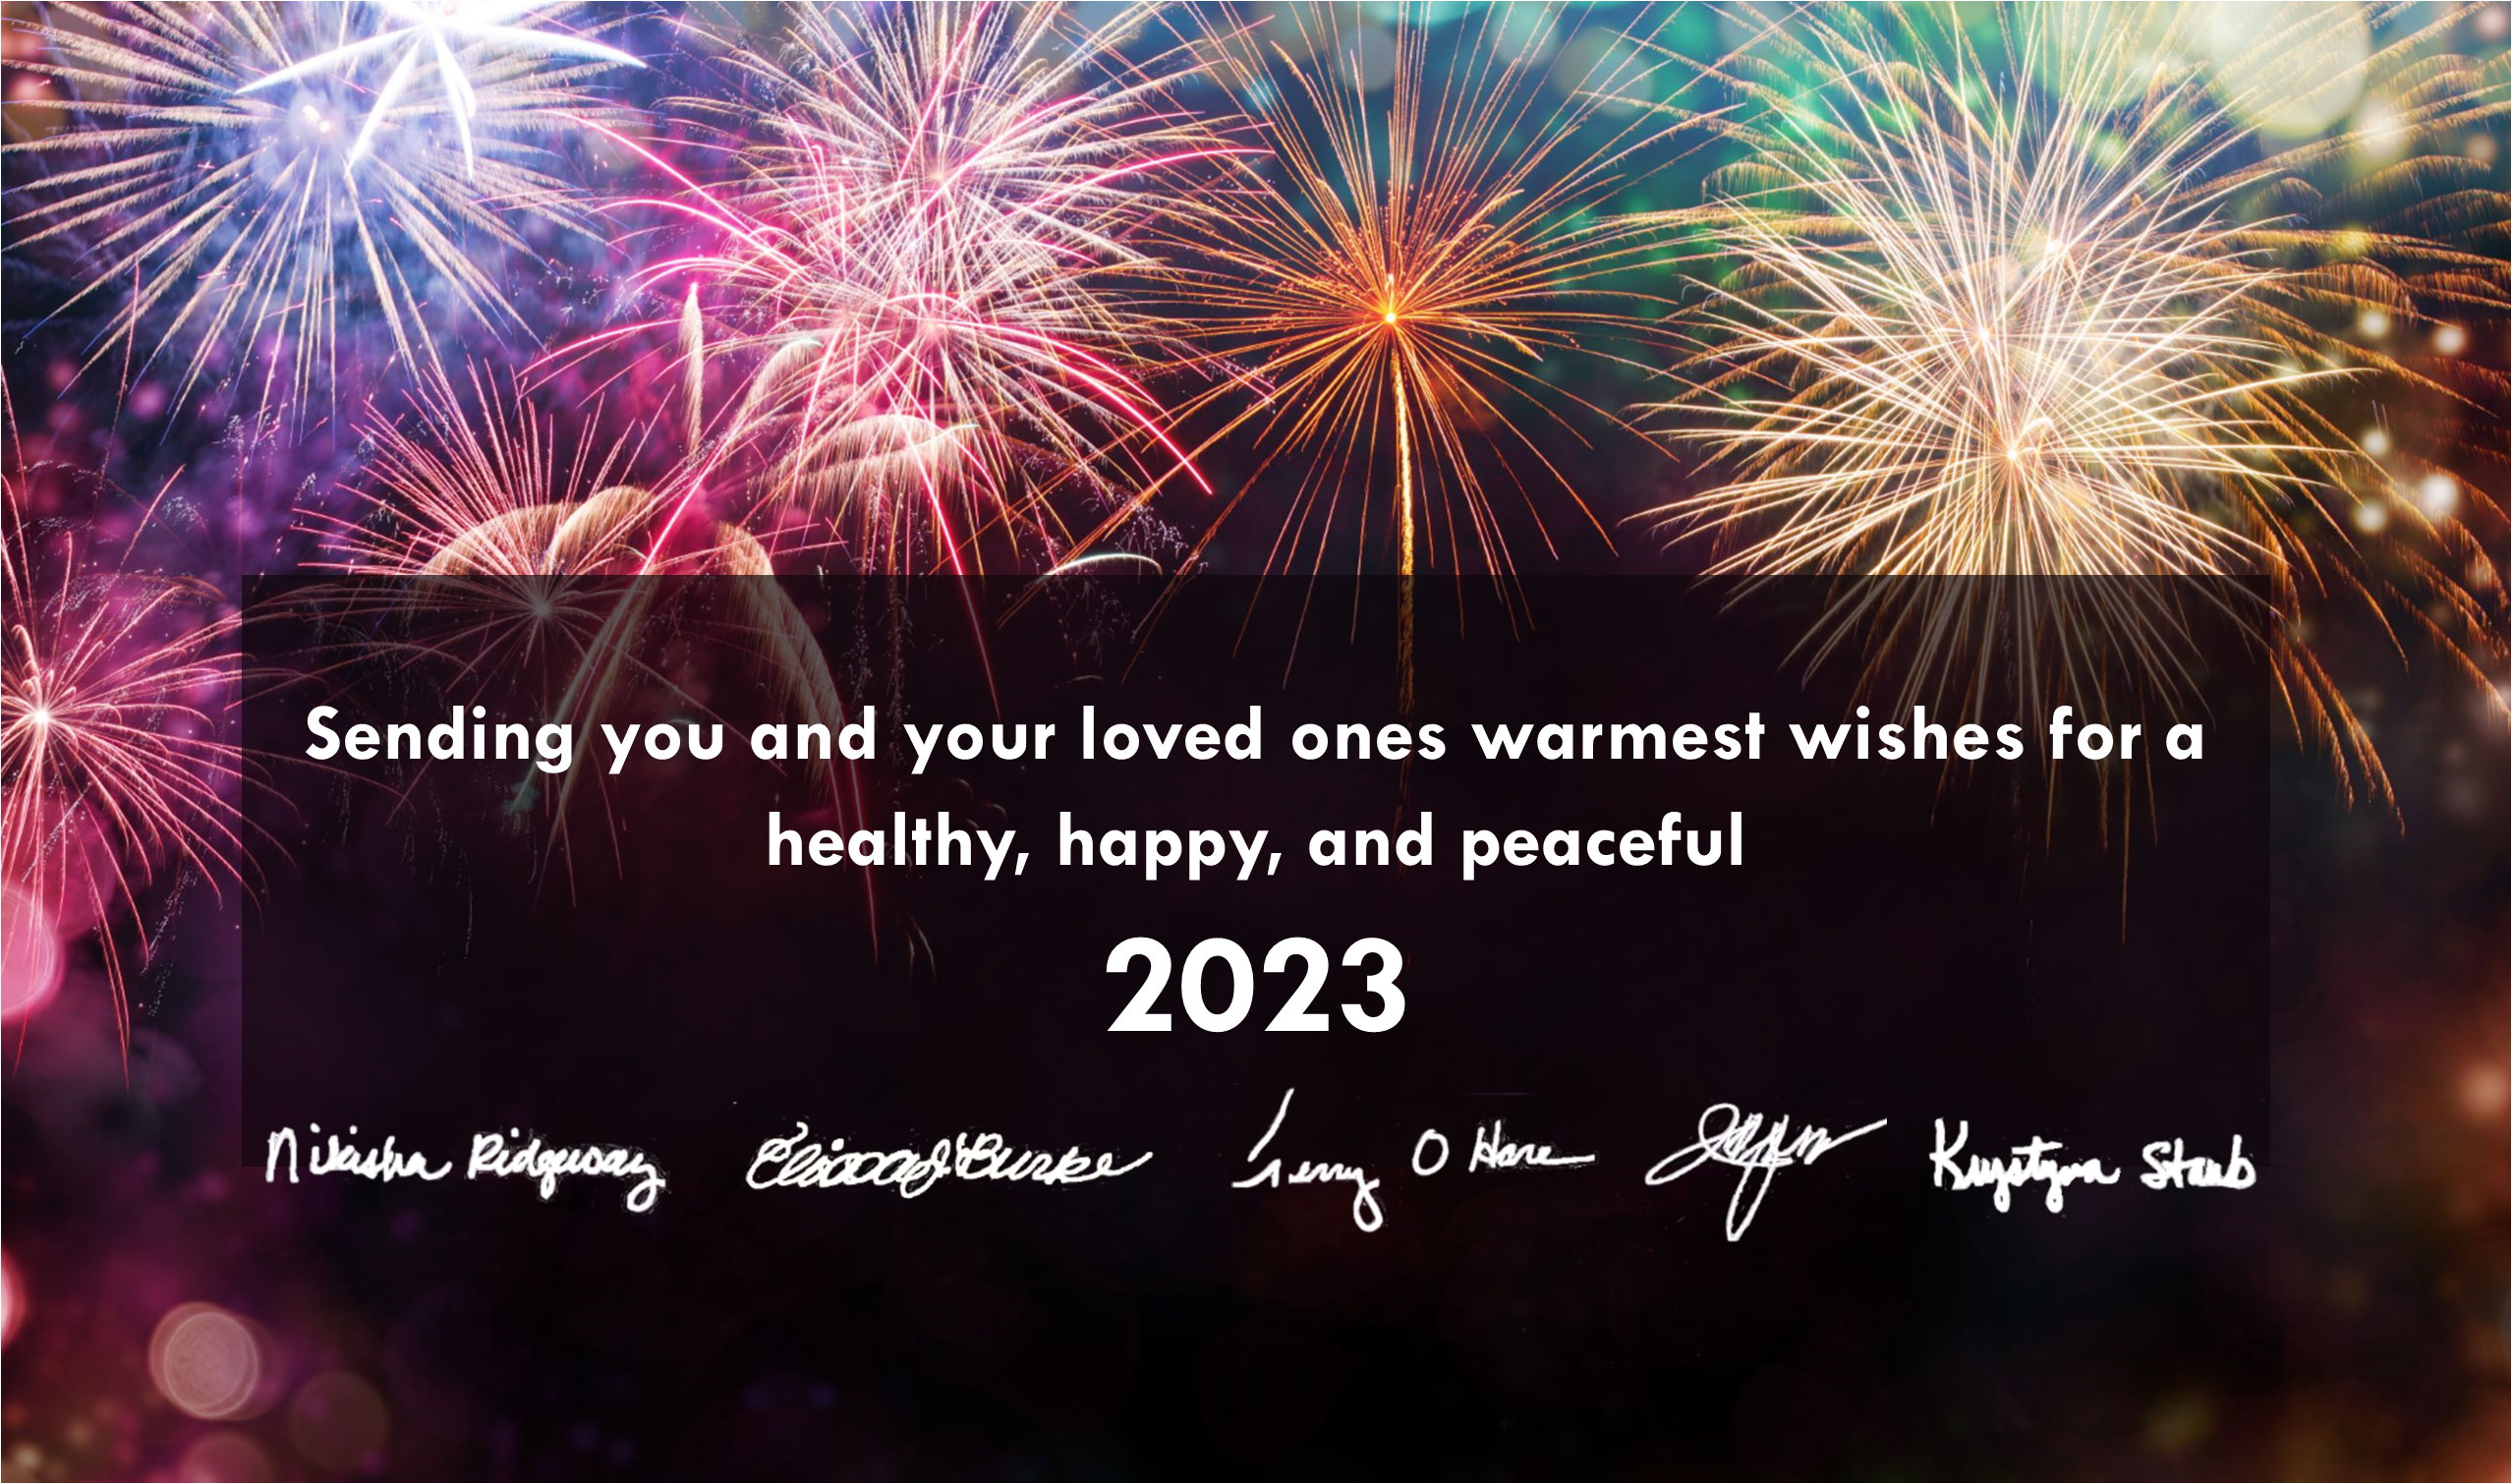 Image of colorful fireworks at night overlaid by message of warmest wishes for a happy healthy and peaceful 2023